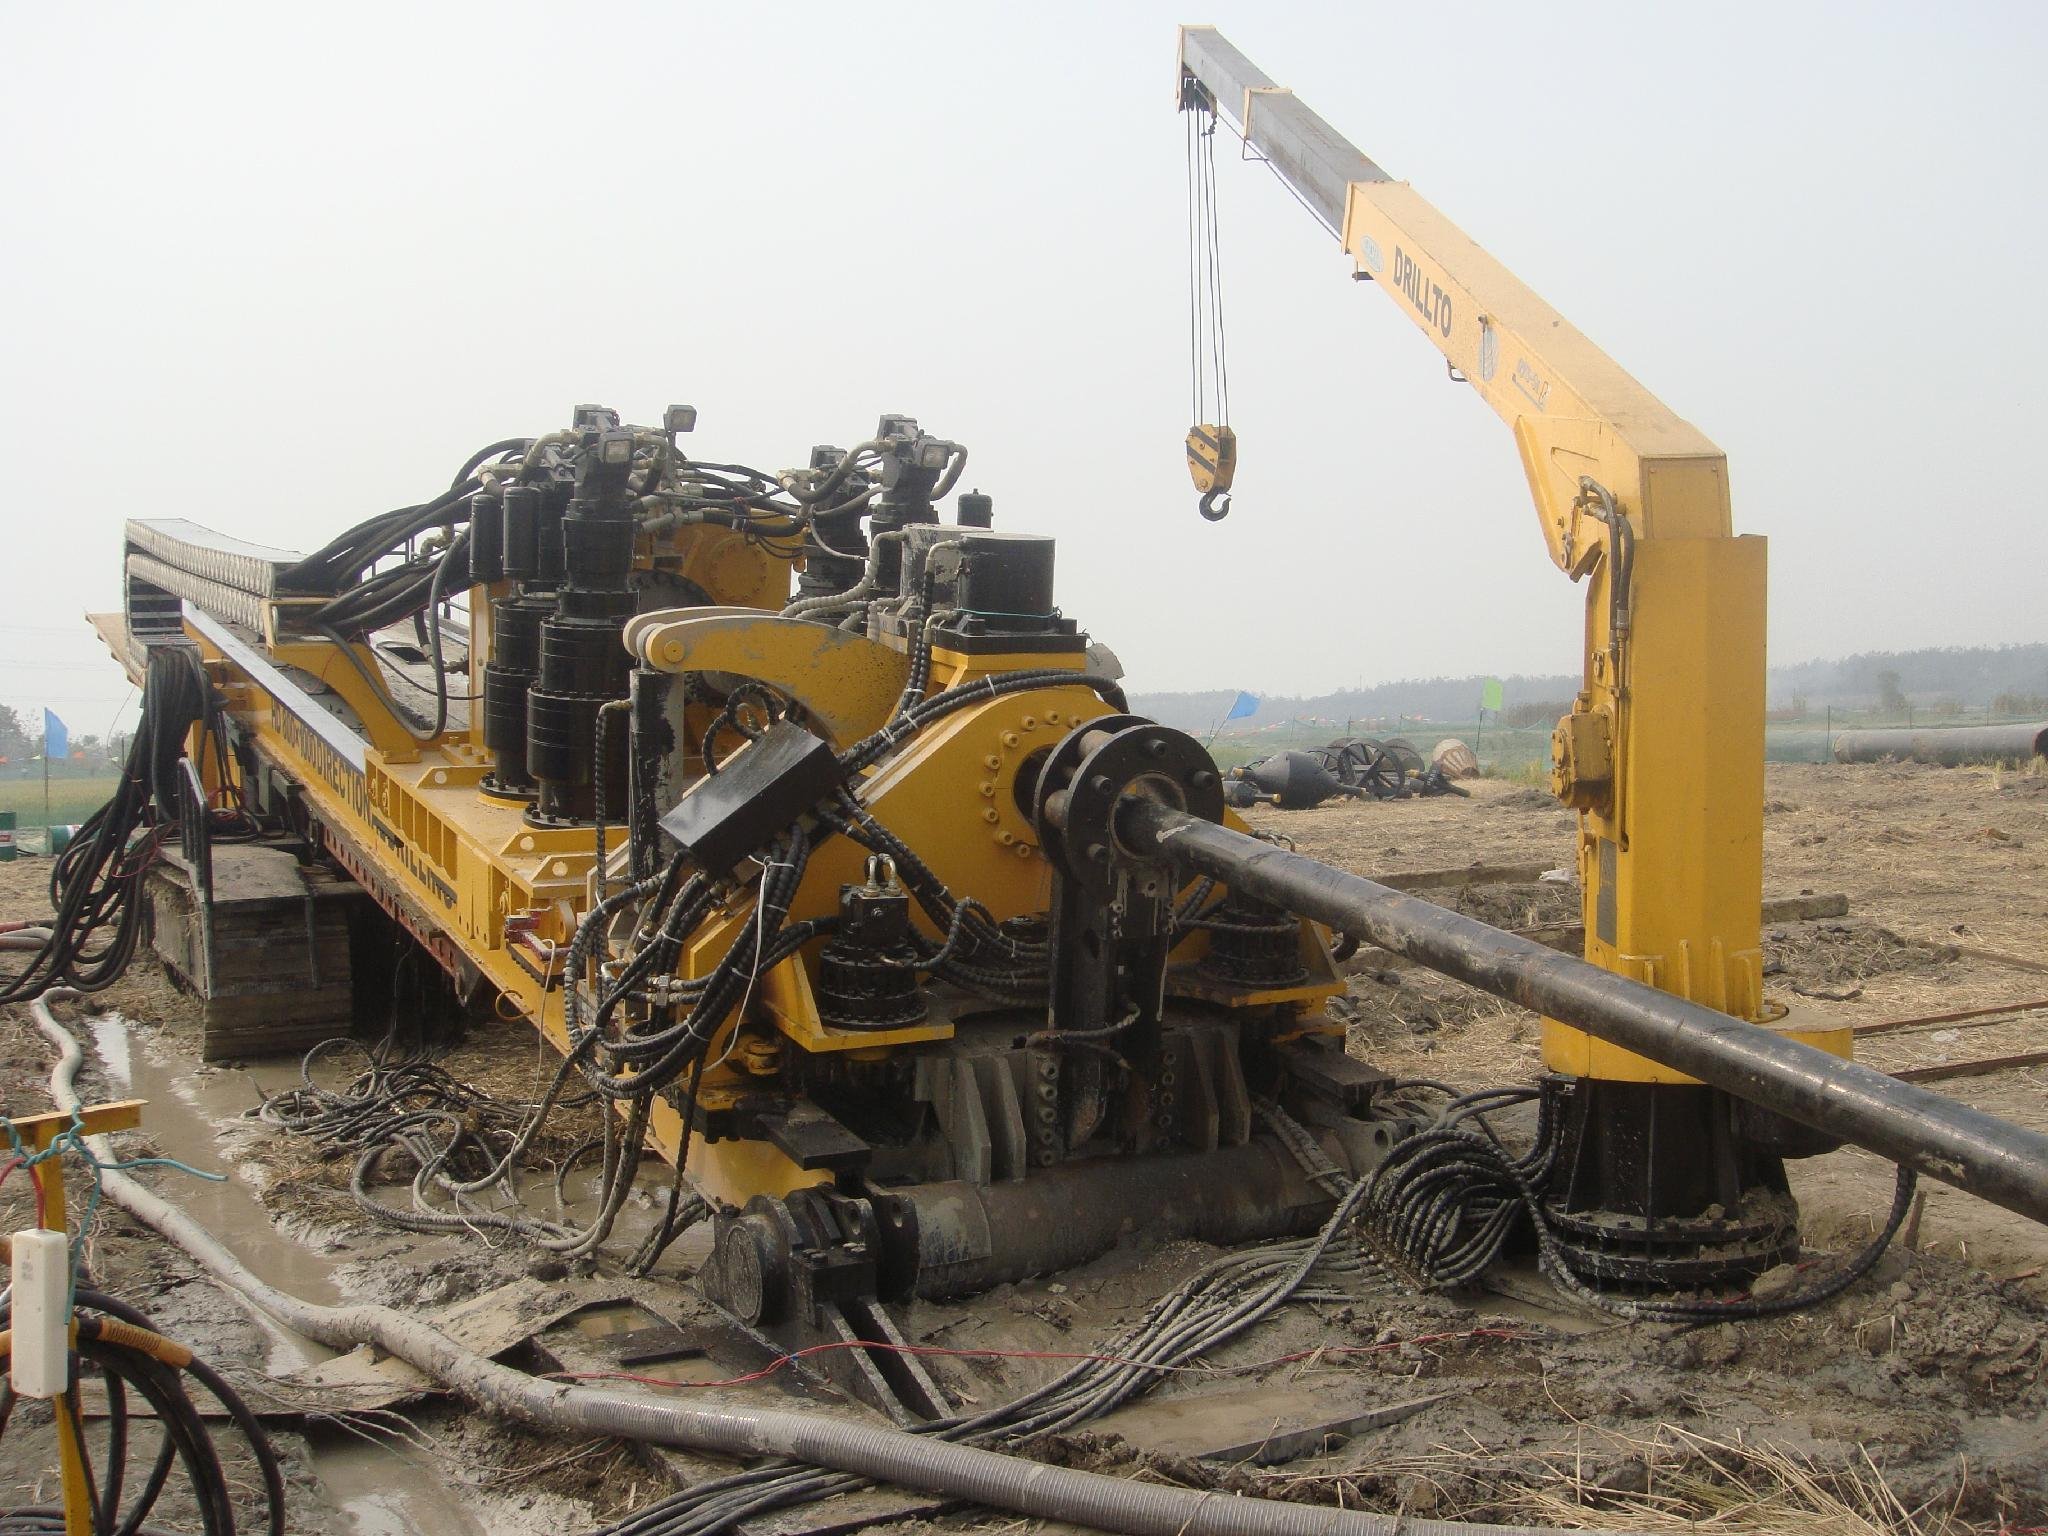 Trenchless / Horizontal Directional Drilling (HDD) Drill Pipe